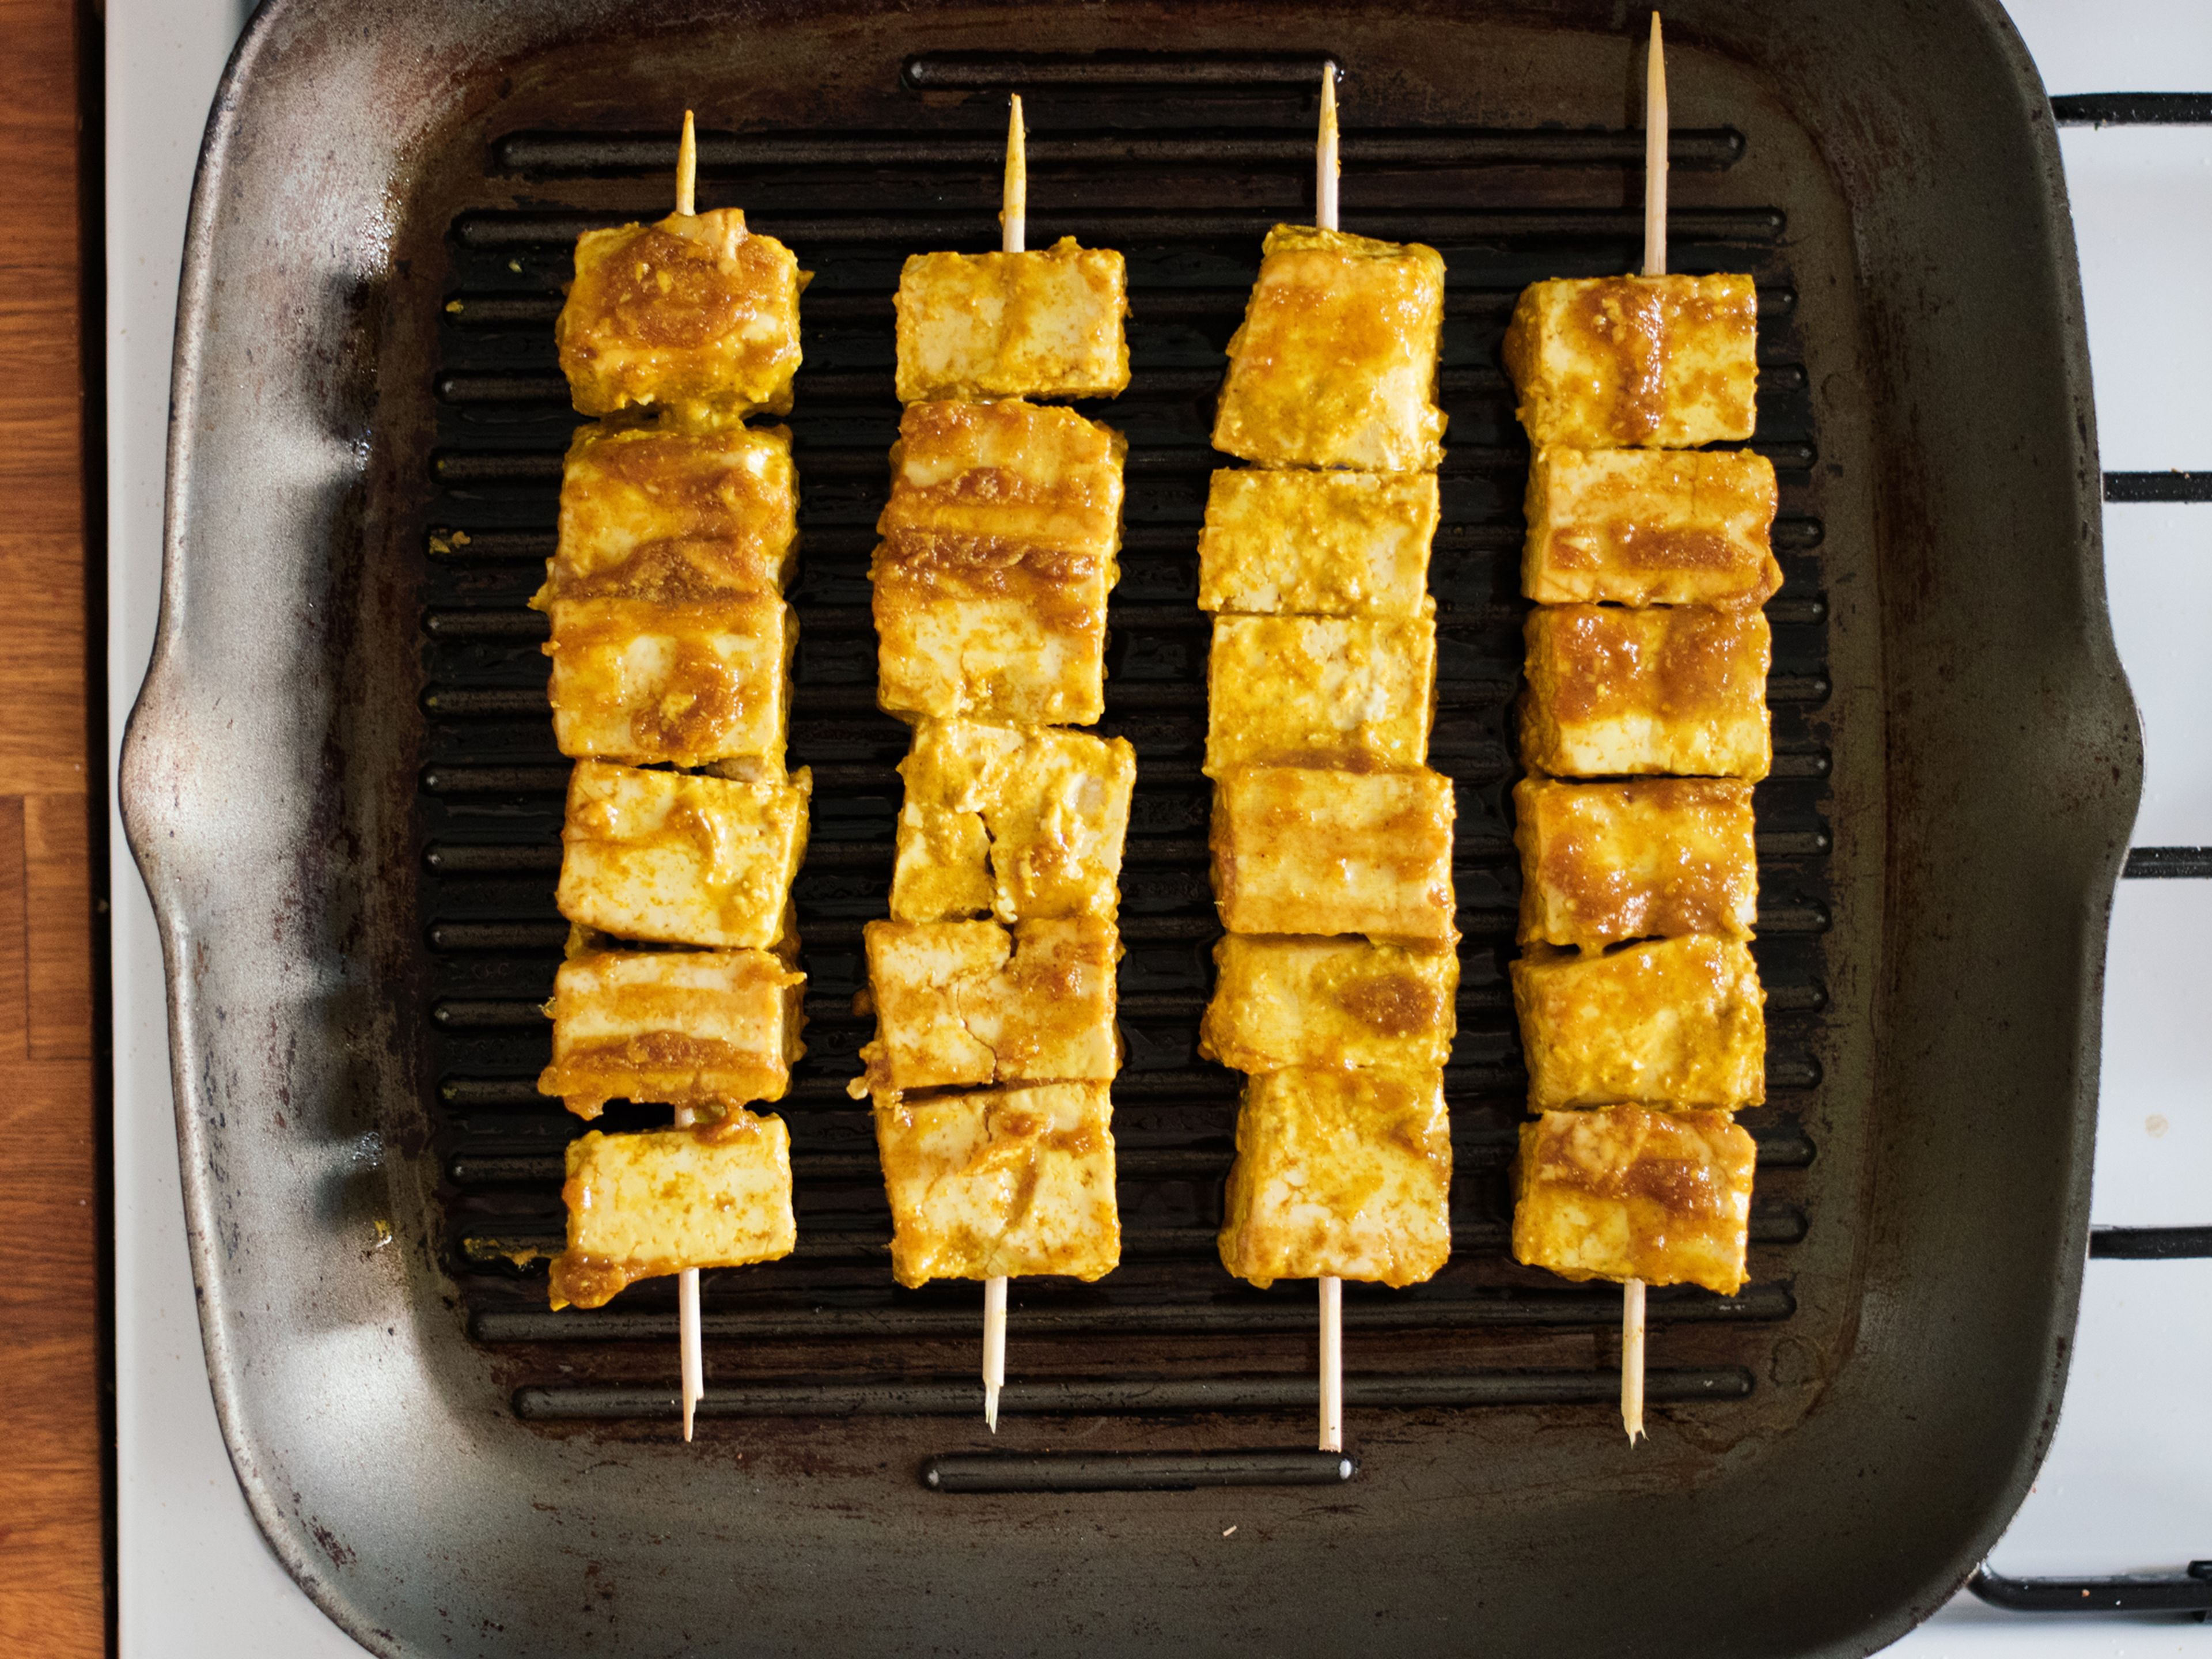 Dust marinated tofu with starch until coated. Thread tofu pieces onto wooden skewers. Heat vegetable oil in a grill pan or a regular frying pan over medium heat. Fry tofu skewers until they are browned on all sides.